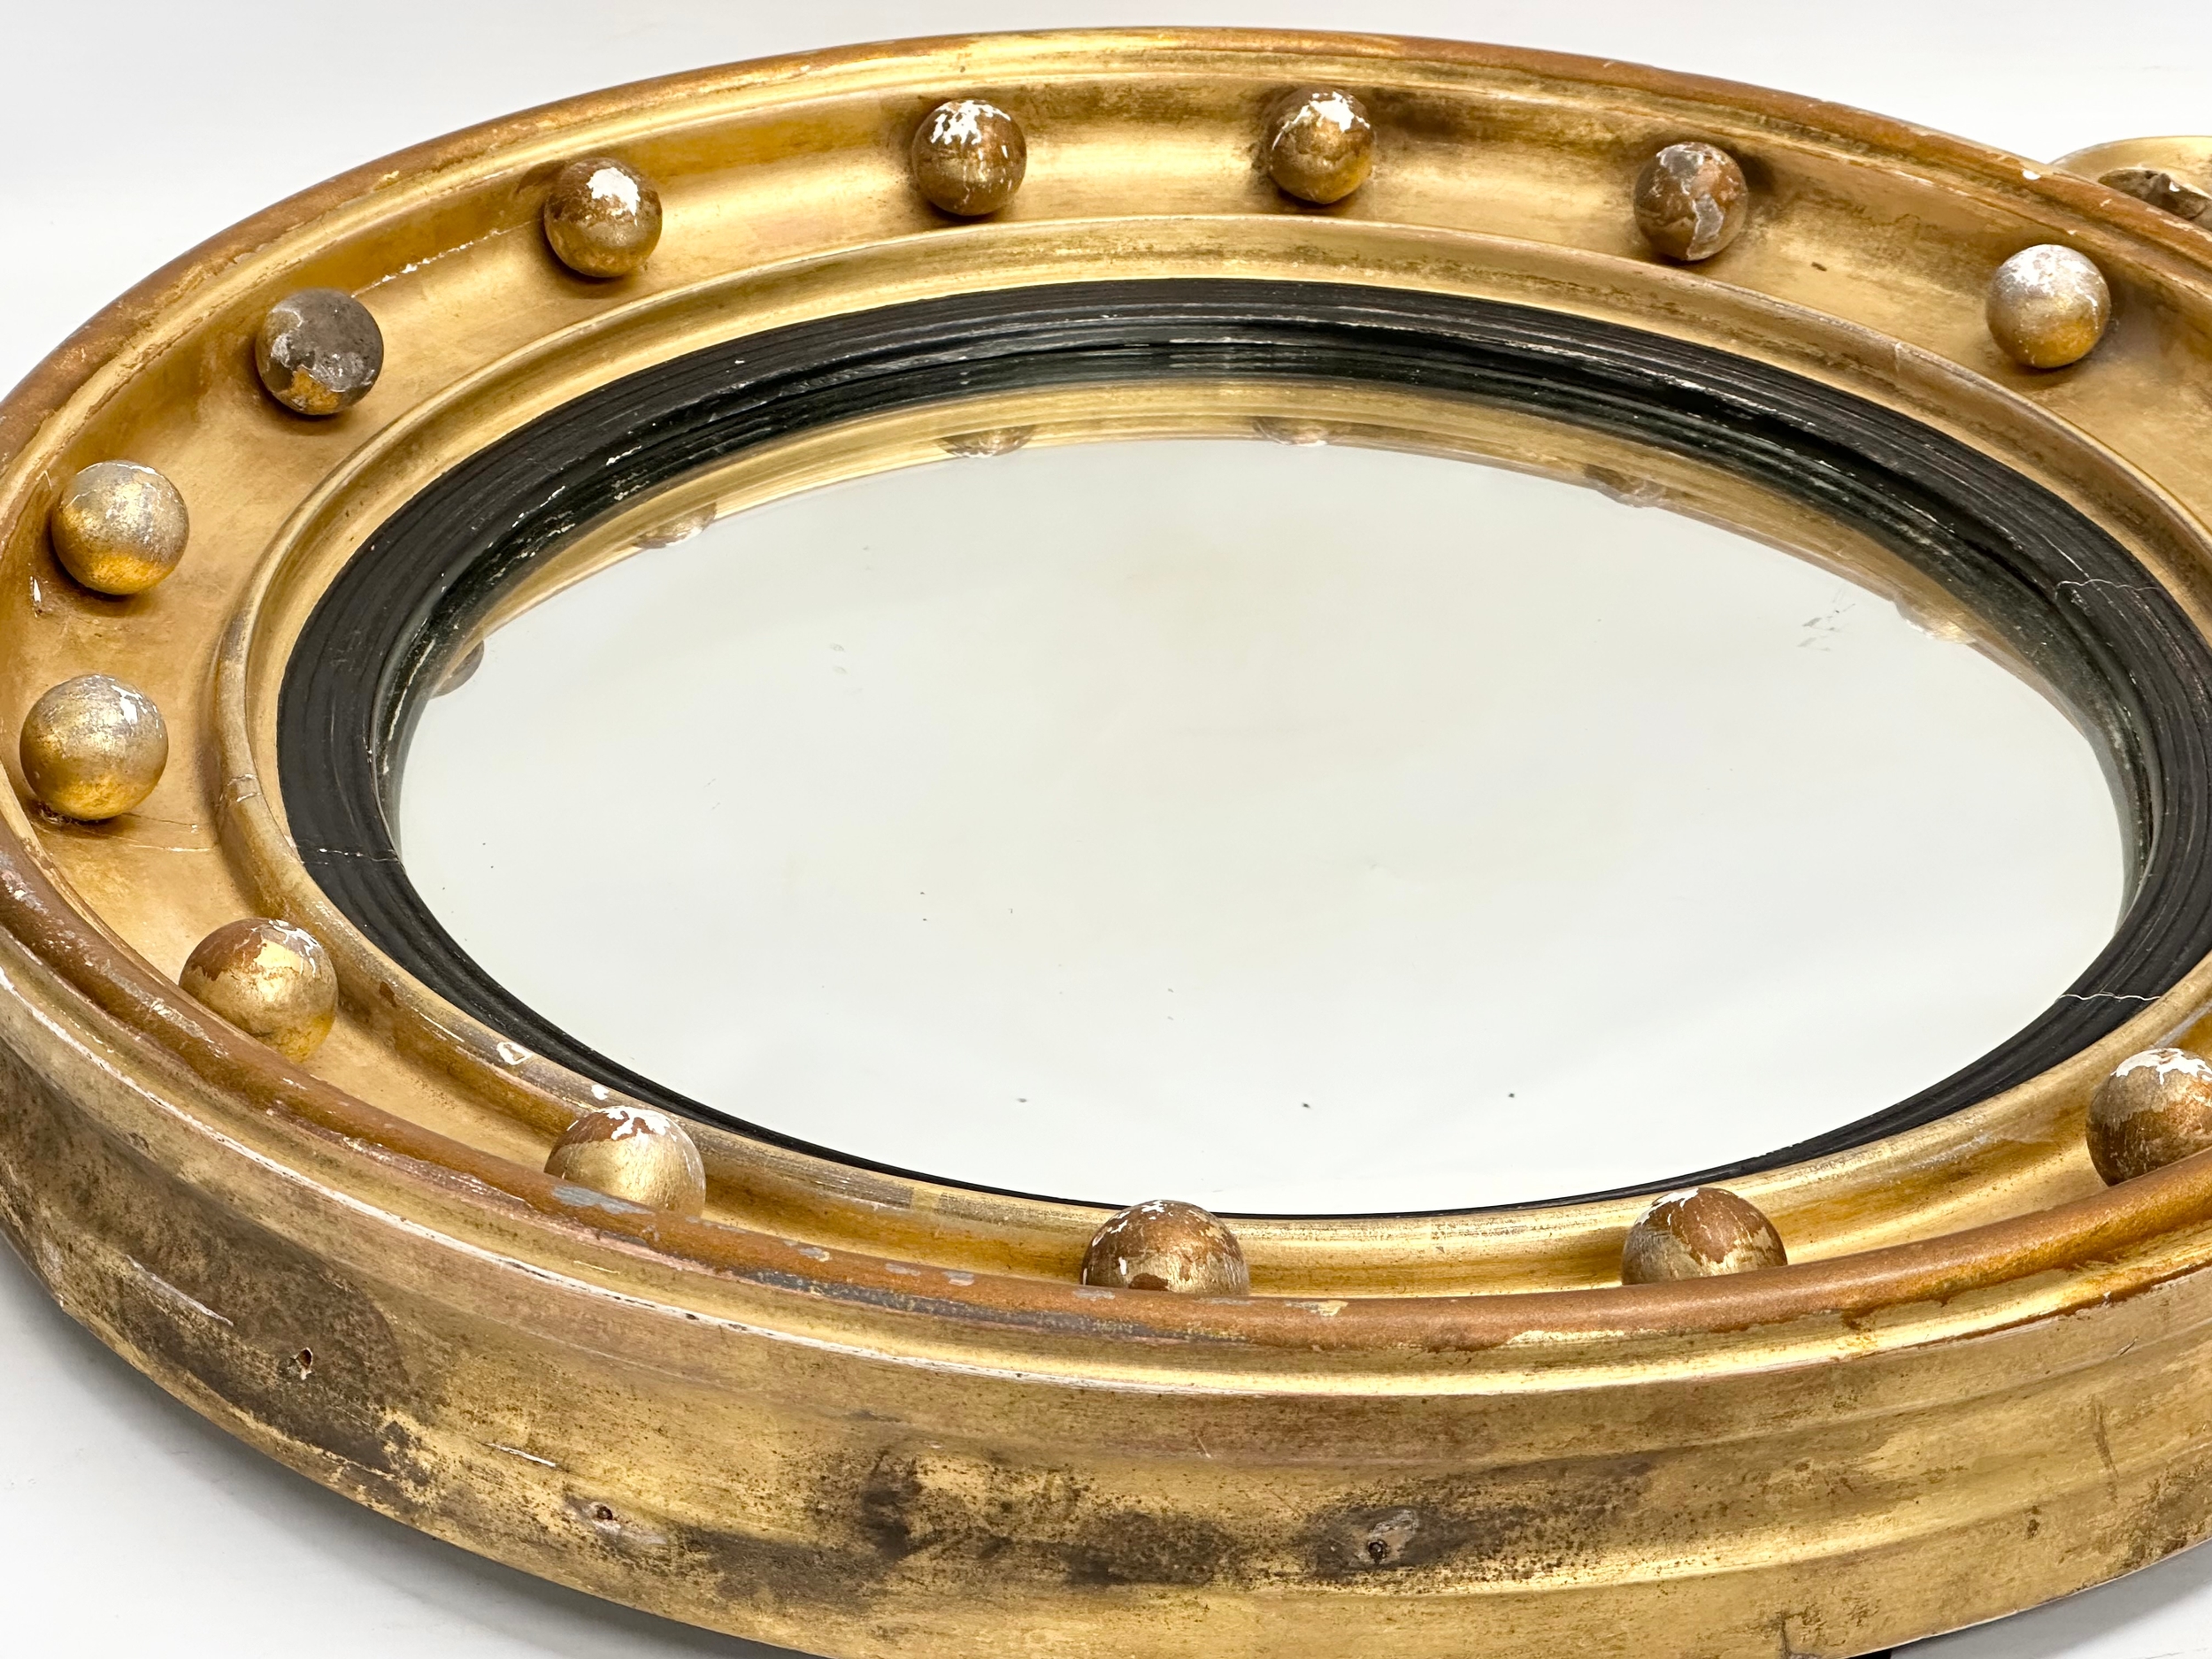 An early 19th century Regency period gilt framed convex mirror with an early 20th century back. - Image 5 of 7